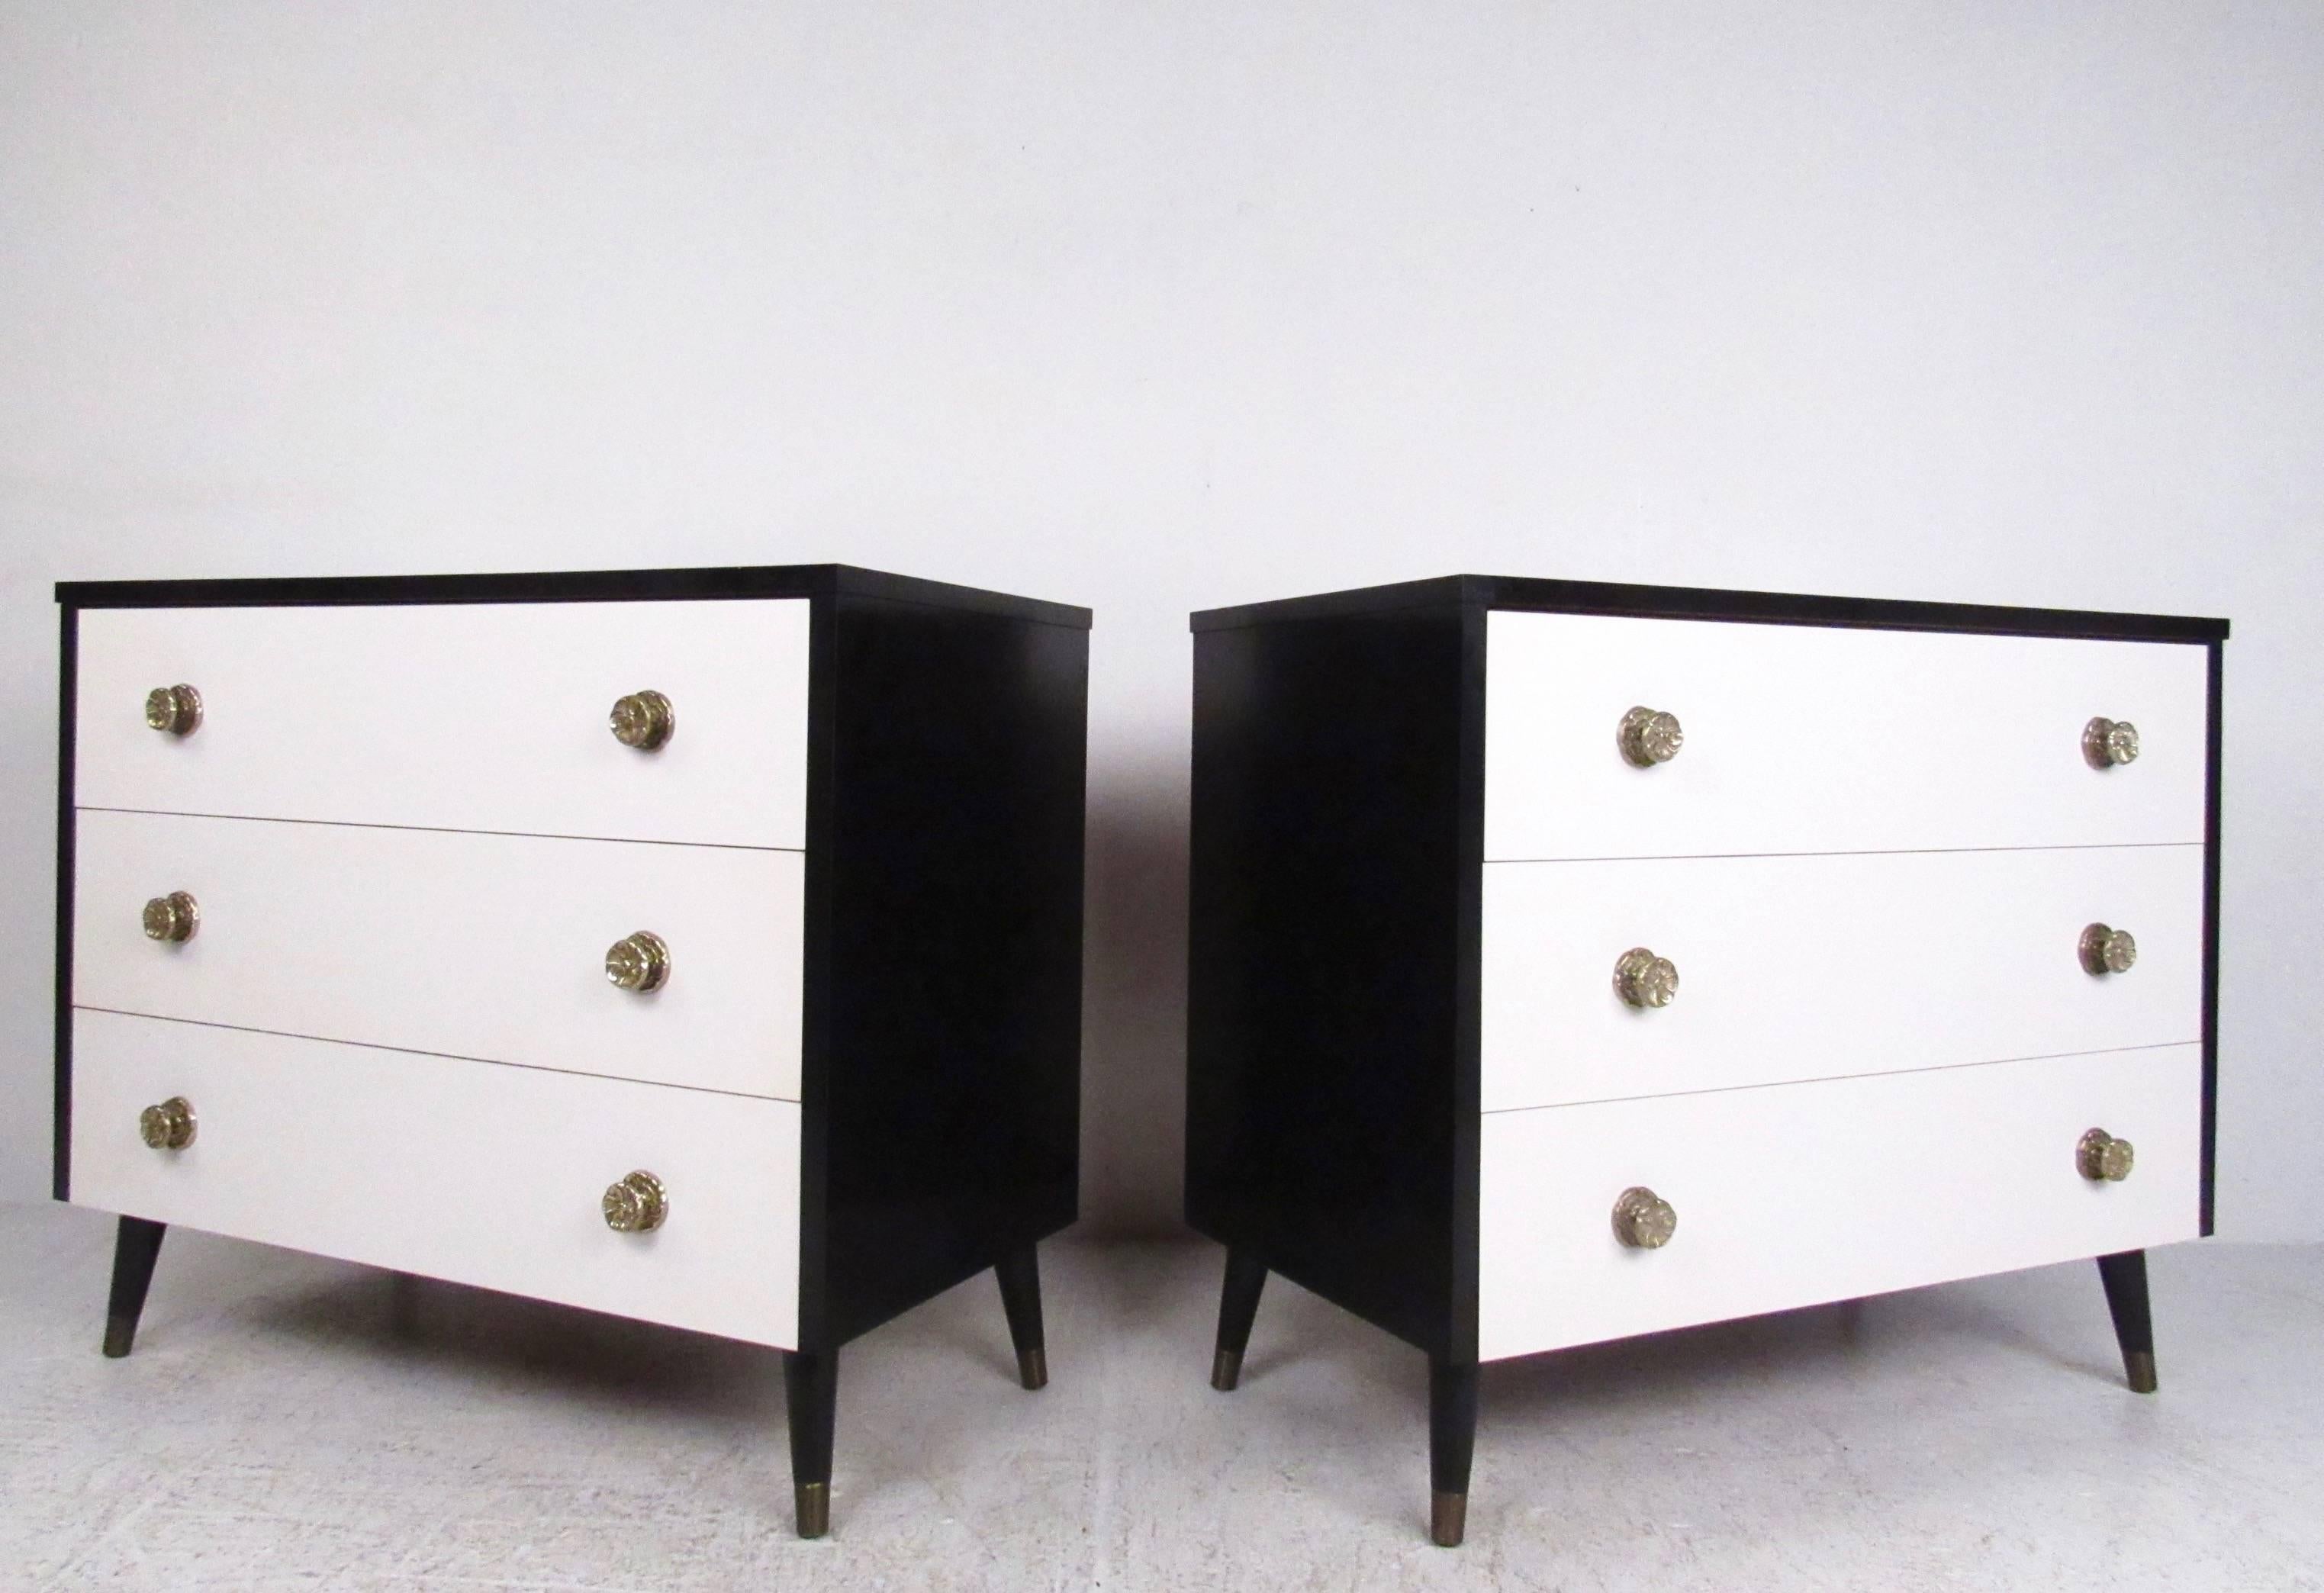 This stylish pair of vintage dressers feature a beautiful two tone lacquer finish with ornate brass pulls. Mid-Century Italian style three-drawer dressers make a unique black and white addition to any bedroom, tapered legs, formica style tops, and